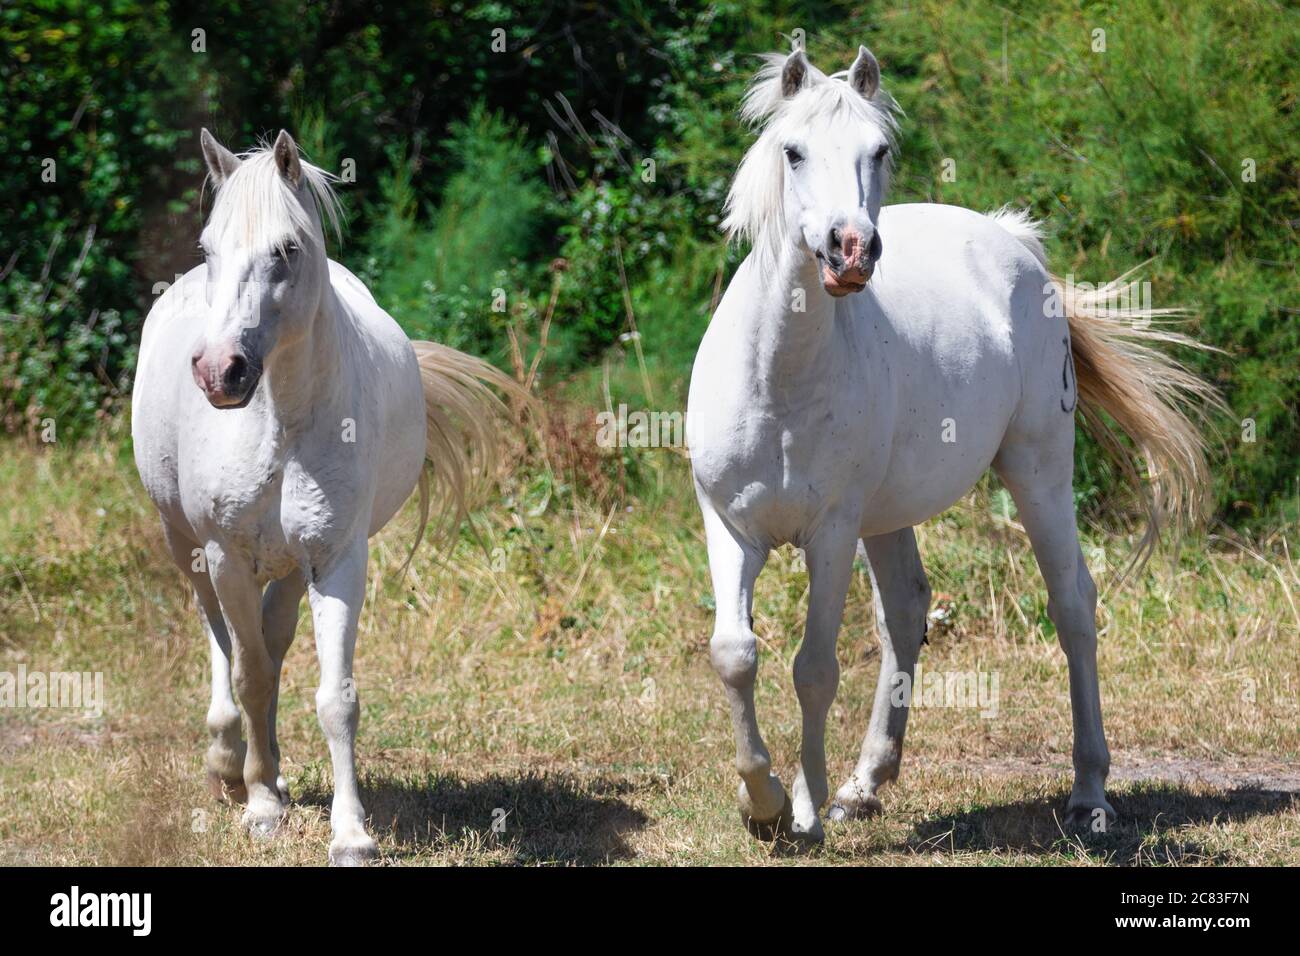 Close up of two white Camargue horses trotting, against a background made of green bushes Stock Photo